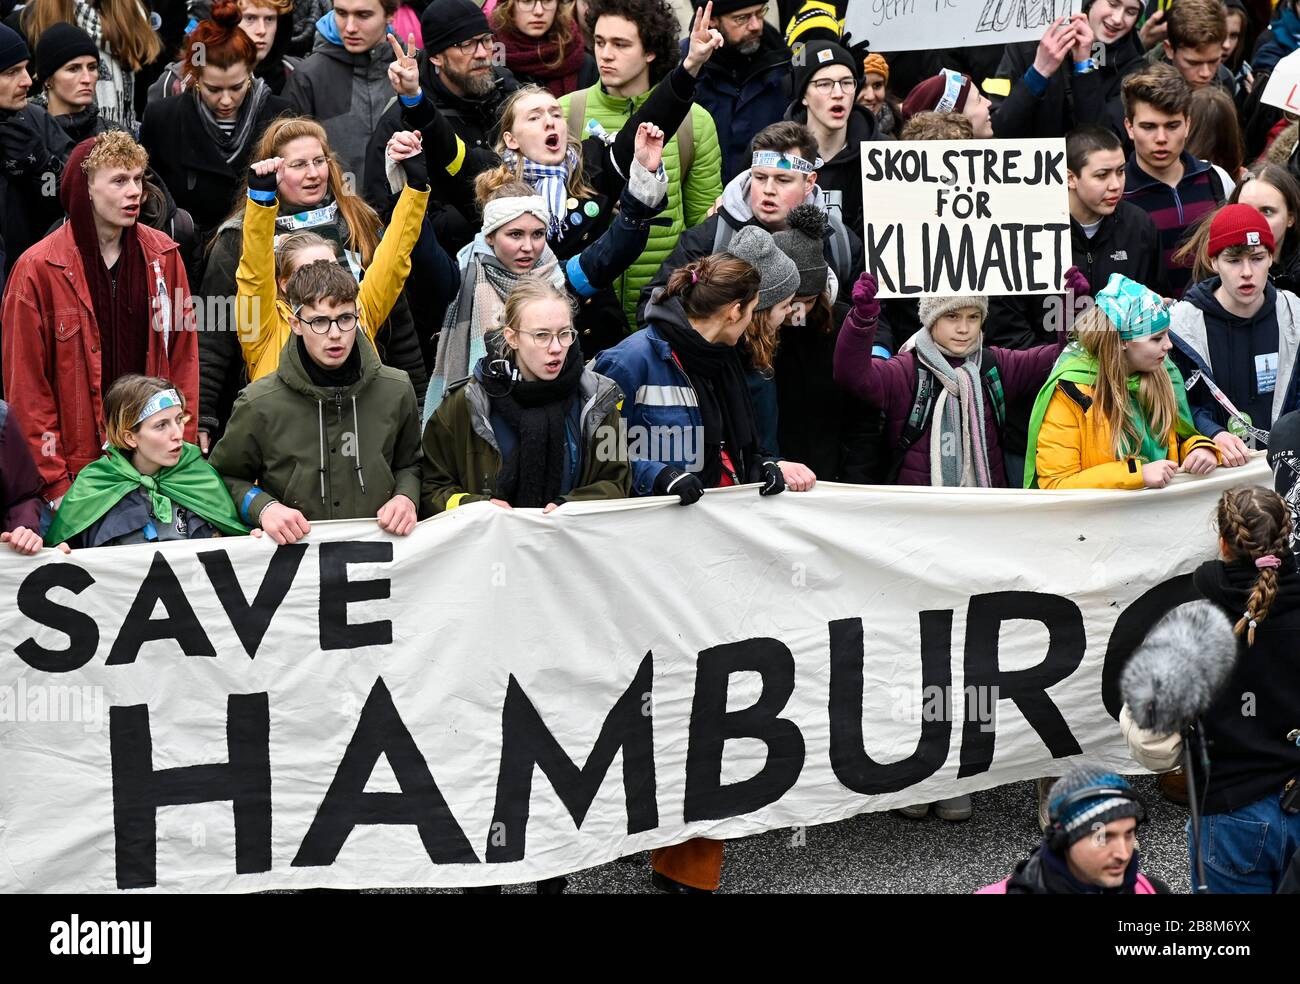 GERMANY, Hamburg city, Fridays for future movement, Save the Climate rally with 30.000 protesters for climate protection, in first row, swedish activist Greta Thunberg with her banner skolstrejk för klimatet, / DEUTSCHLAND, Hamburg, Fridays-for future Bewegung, Demo fuer Klimaschutz, Greta Thunberg mit ihrem Plakat skolstrejk för klimatet, 21.2.2020 Stock Photo